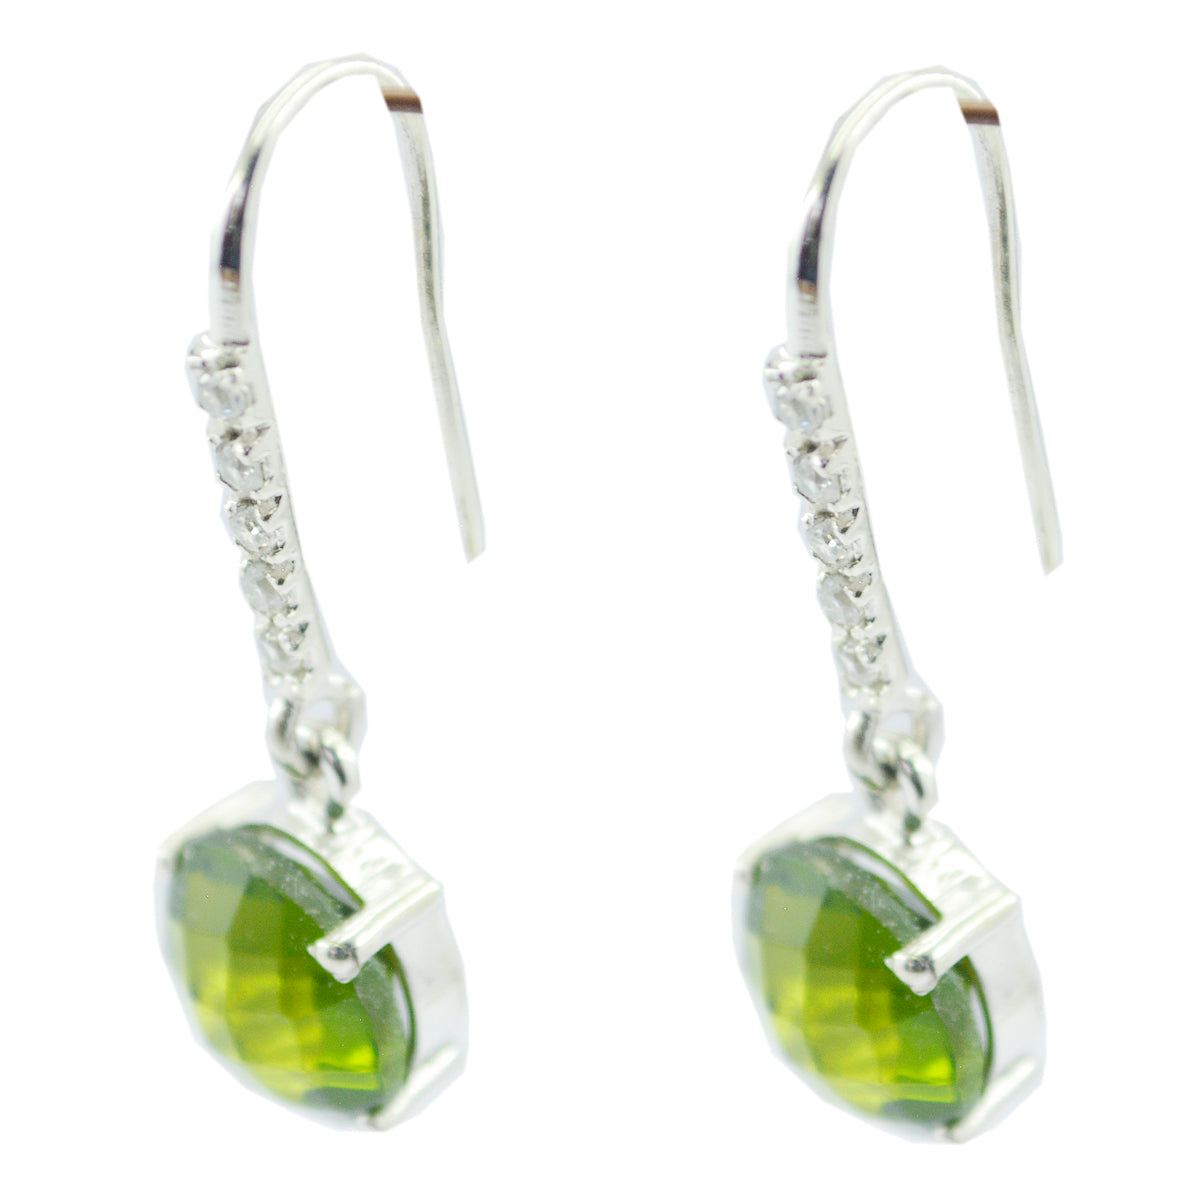 Riyo Genuine Gems round Faceted Green Peridot Silver Earring gift for engagement